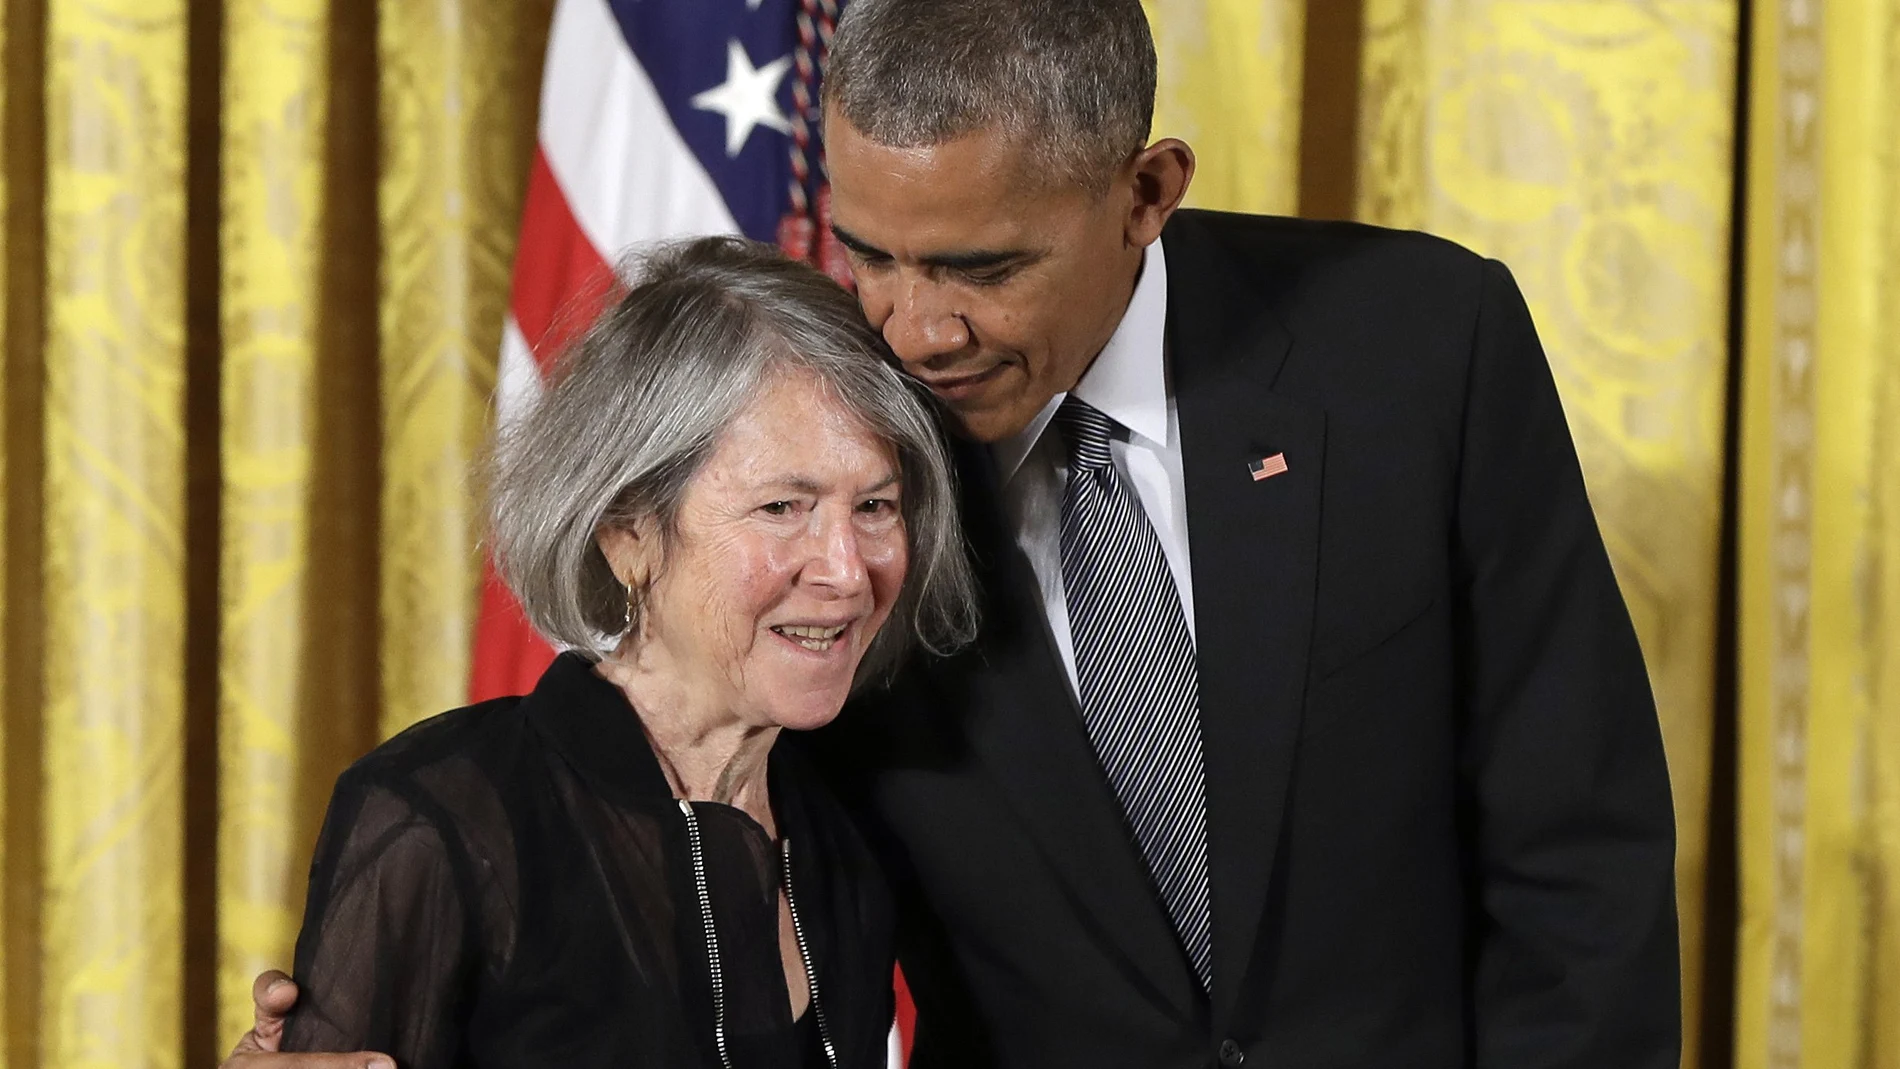 FILE - In this Thursday, Sept. 22, 2016 file photo, President Barack Obama embraces poet Louise Gluck before awarding her the 2015 National Humanities Medal during a ceremony in the East Room of the White House, in Washington. The 2020 Nobel Prize for literature has been awarded to American poet Louise Gluck â€œfor her unmistakable poetic voice that with austere beauty makes individual existence universal.â€ The prize was announced Thursday Oct. 8, 2020 in Stockholm by Mats Malm, the permanent secretary of the Swedish Academy. (AP Photo/Carolyn Kaster, File)